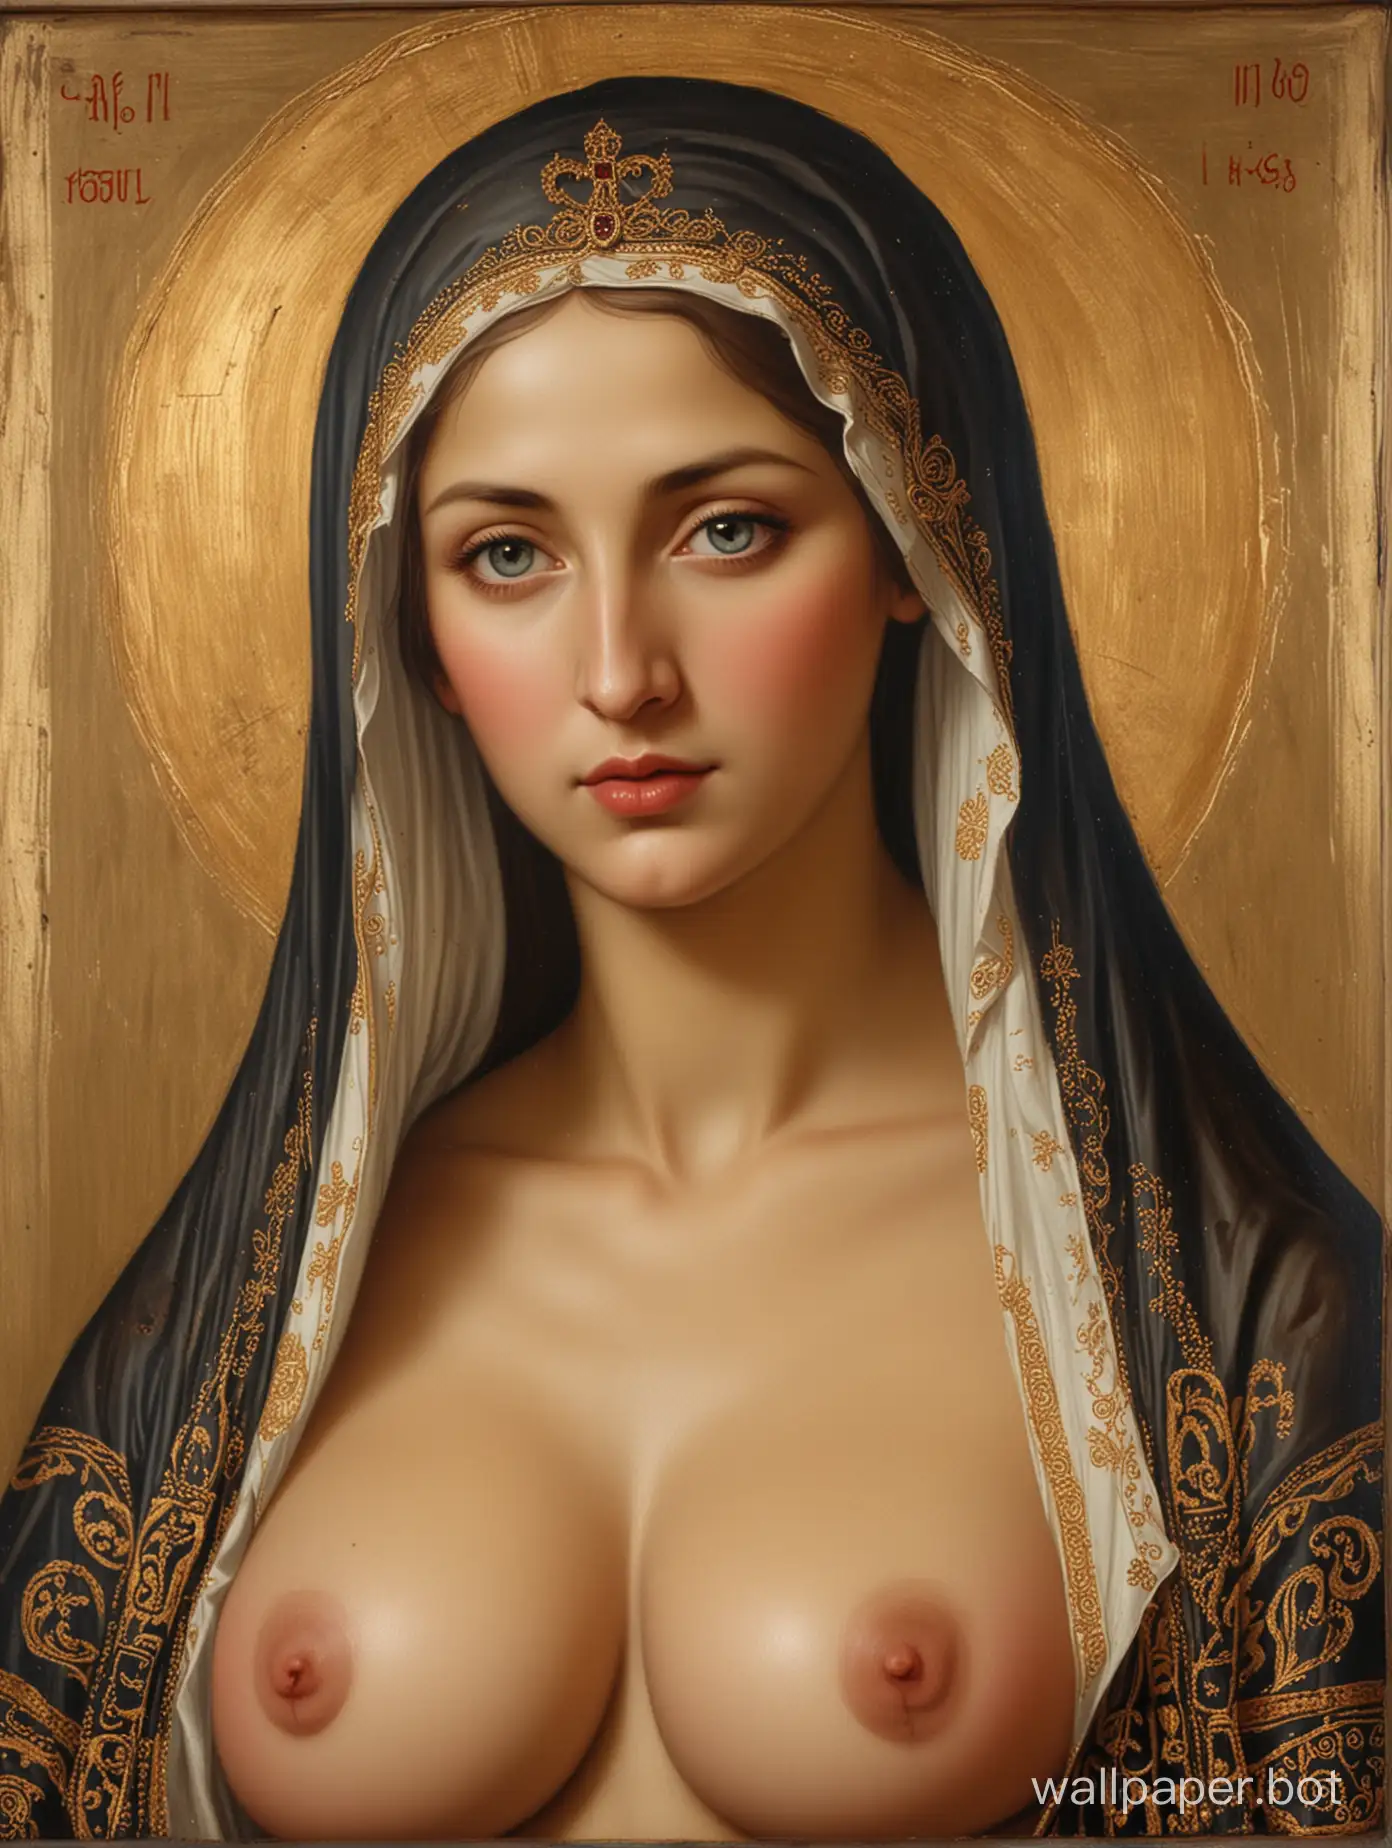 Our Lady of Kazan, portrait 1:4, orthodox icon, iconography, very big boobs, partially nude,  best quality, nsfw, open clothes 